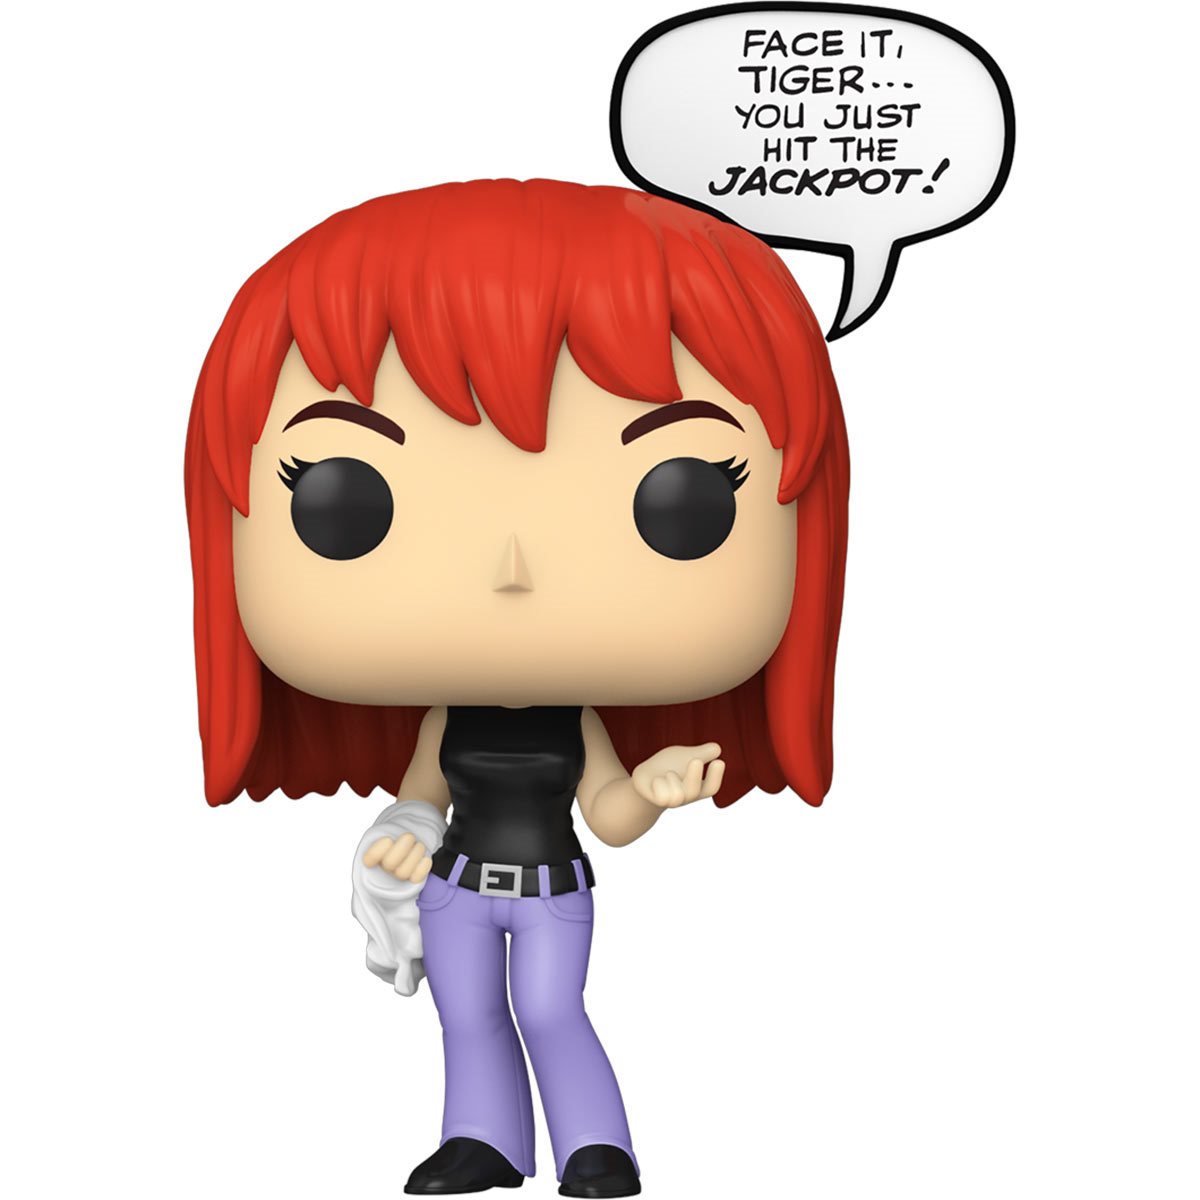 Mary Jane Watson Entertainment Earth exclusive Pop!